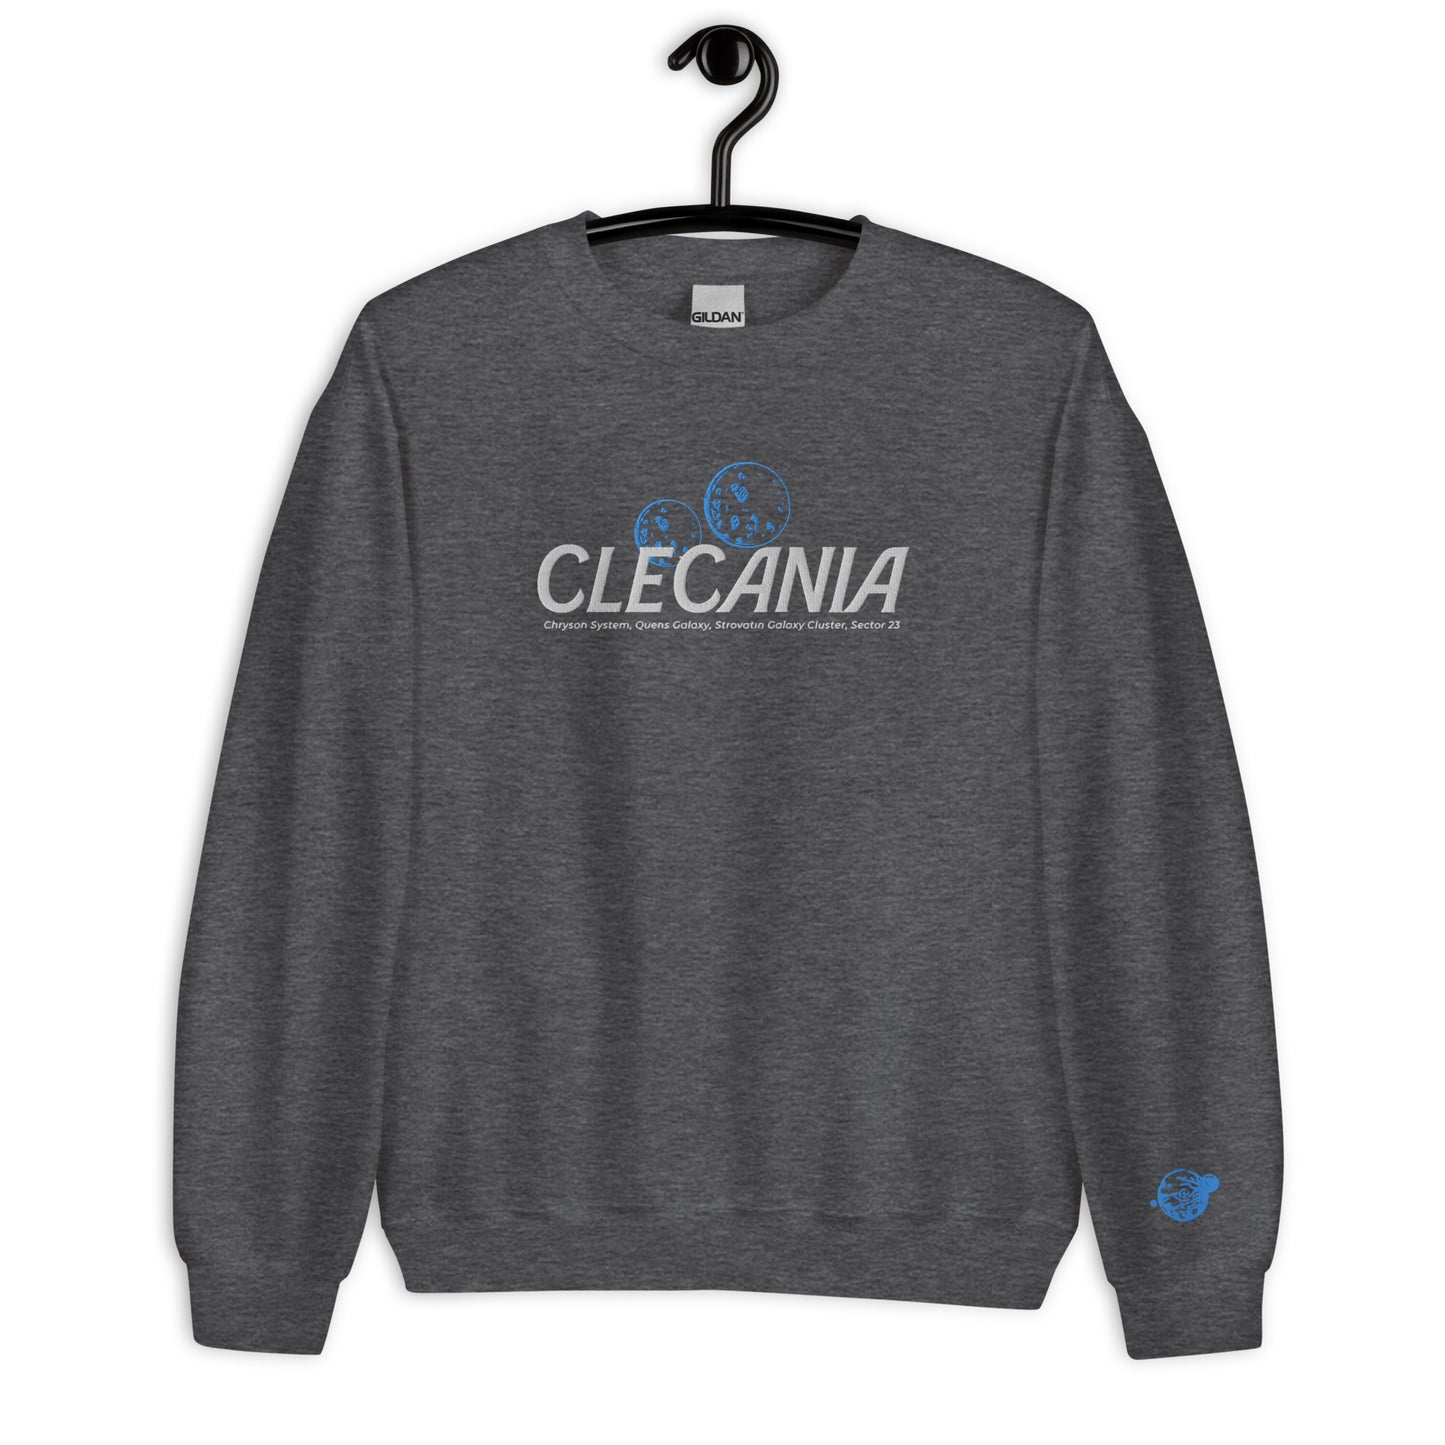 Clecania Embroidered Sweater